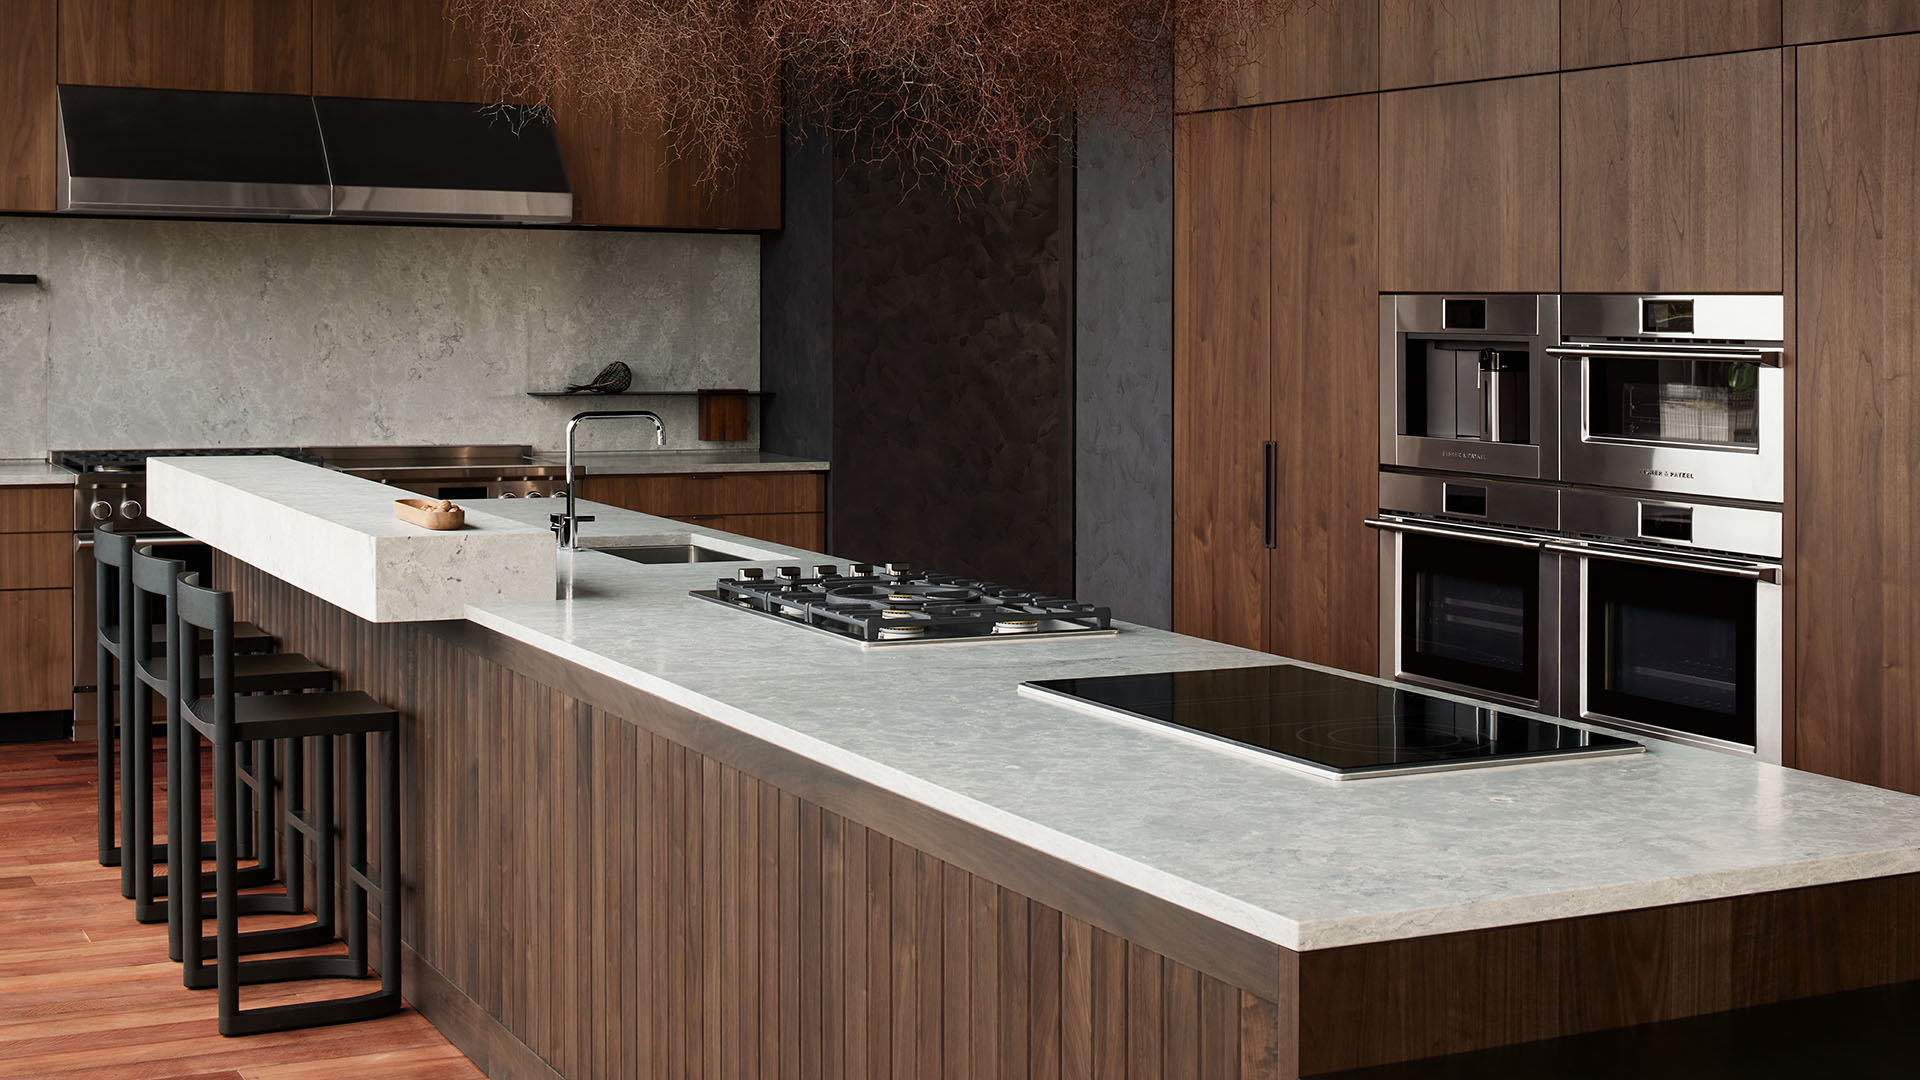 Shot of the kitchen island, showcasing the Contemporary Gas Cooktop